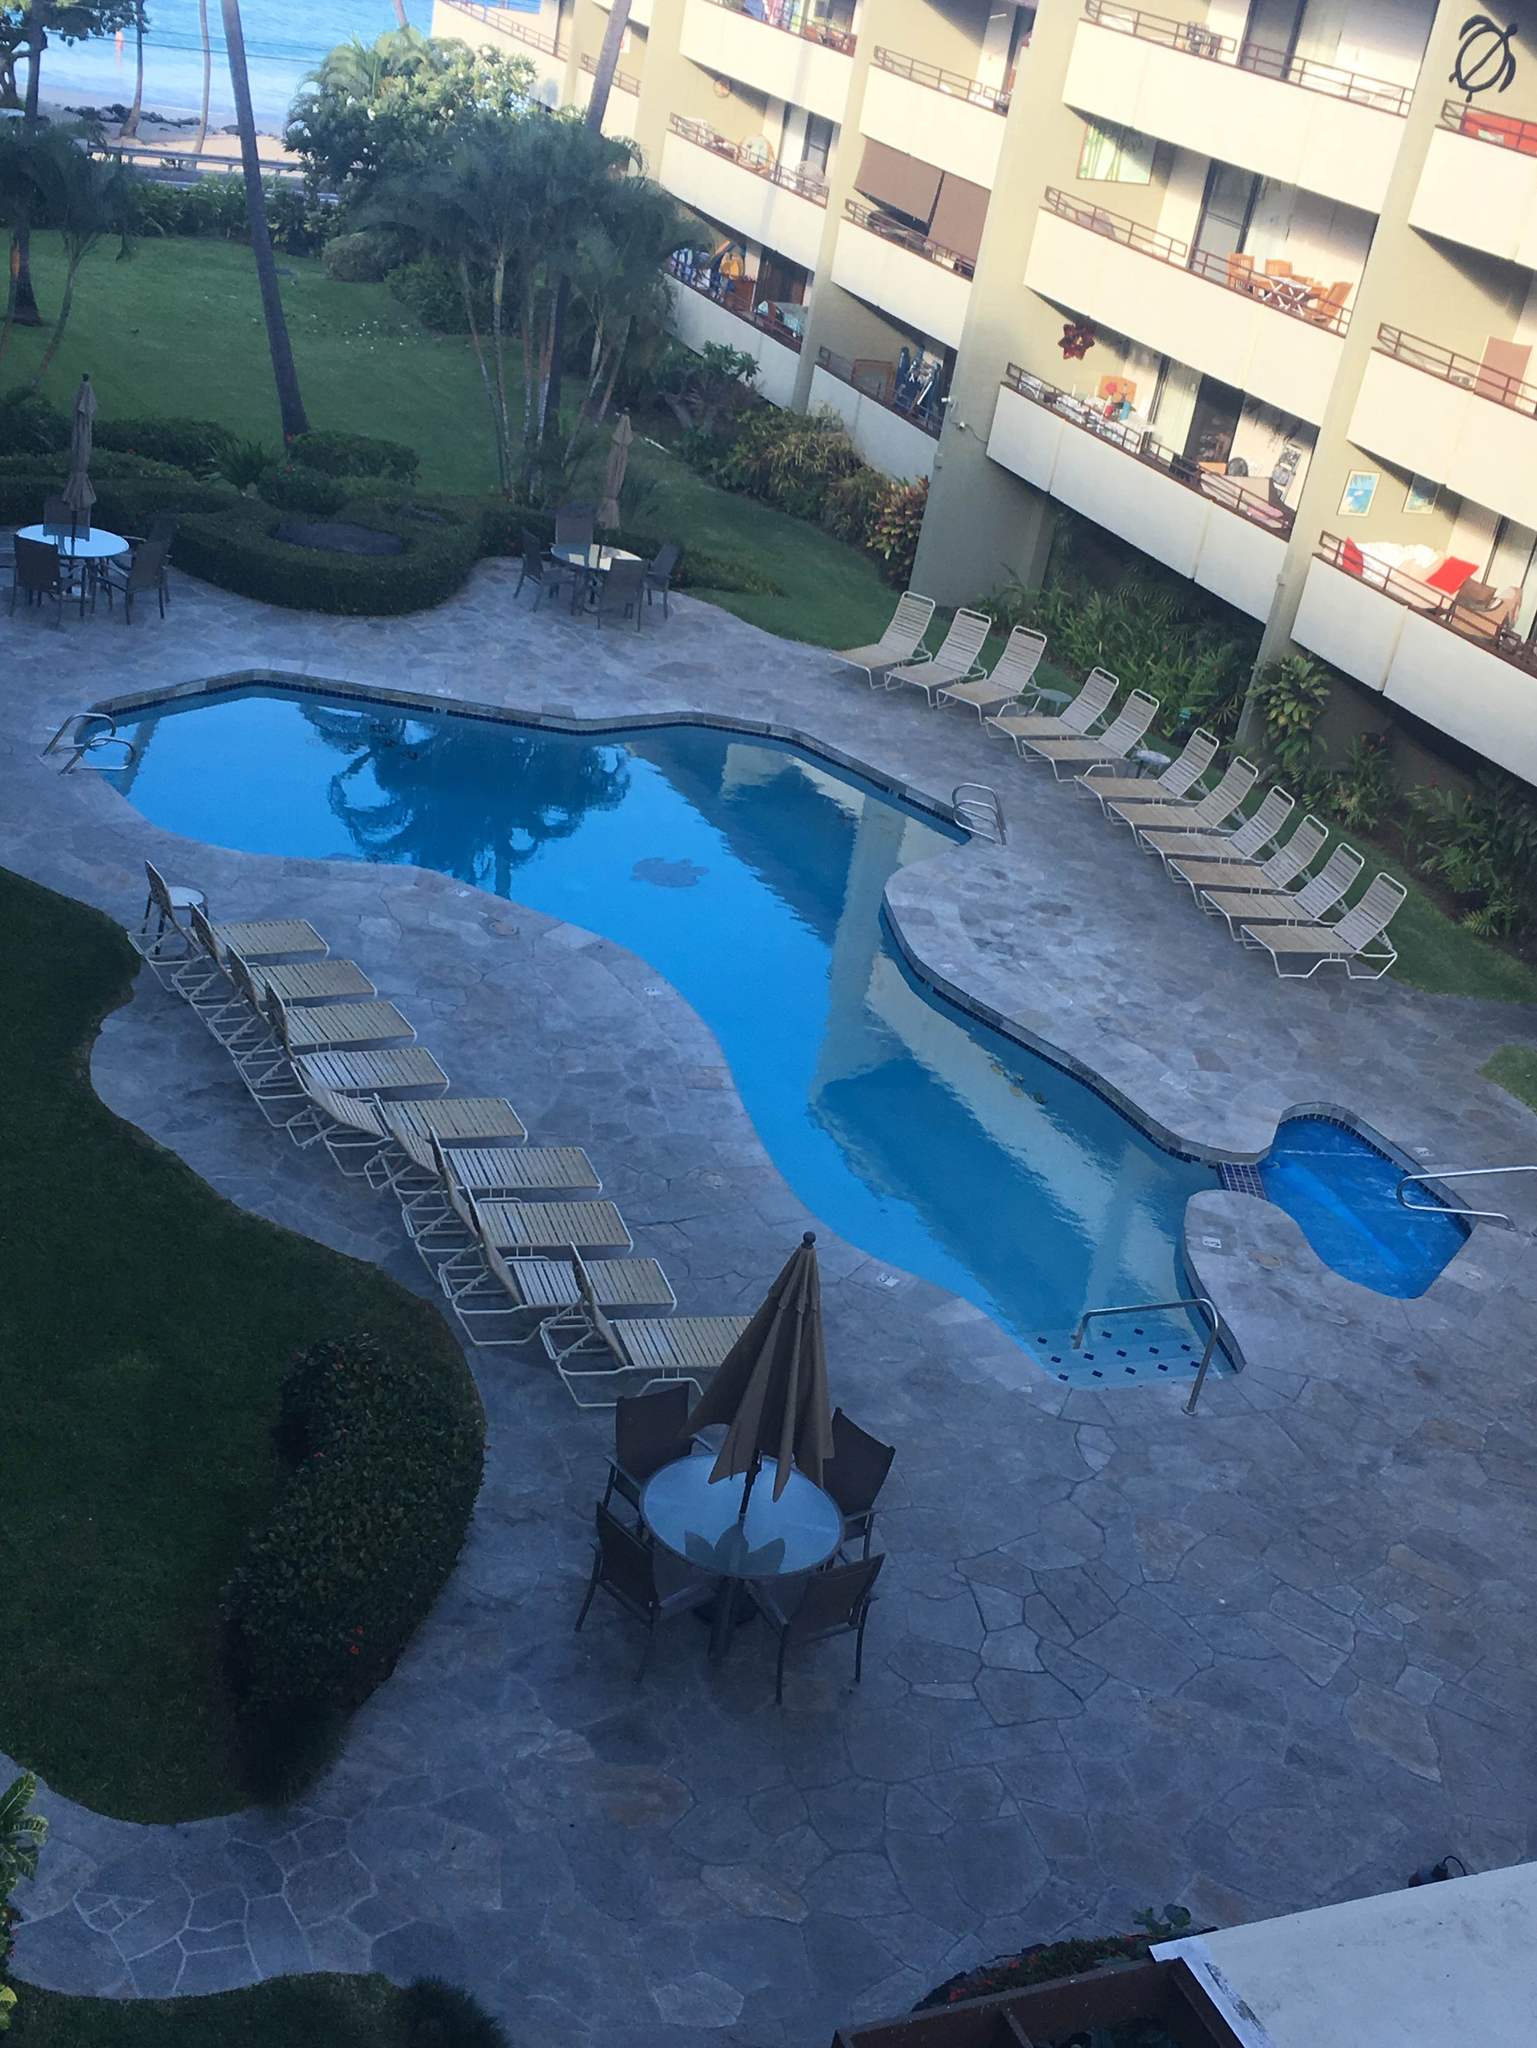 the strangest shape for a pool. this is from a hotel I’m staying at - meme